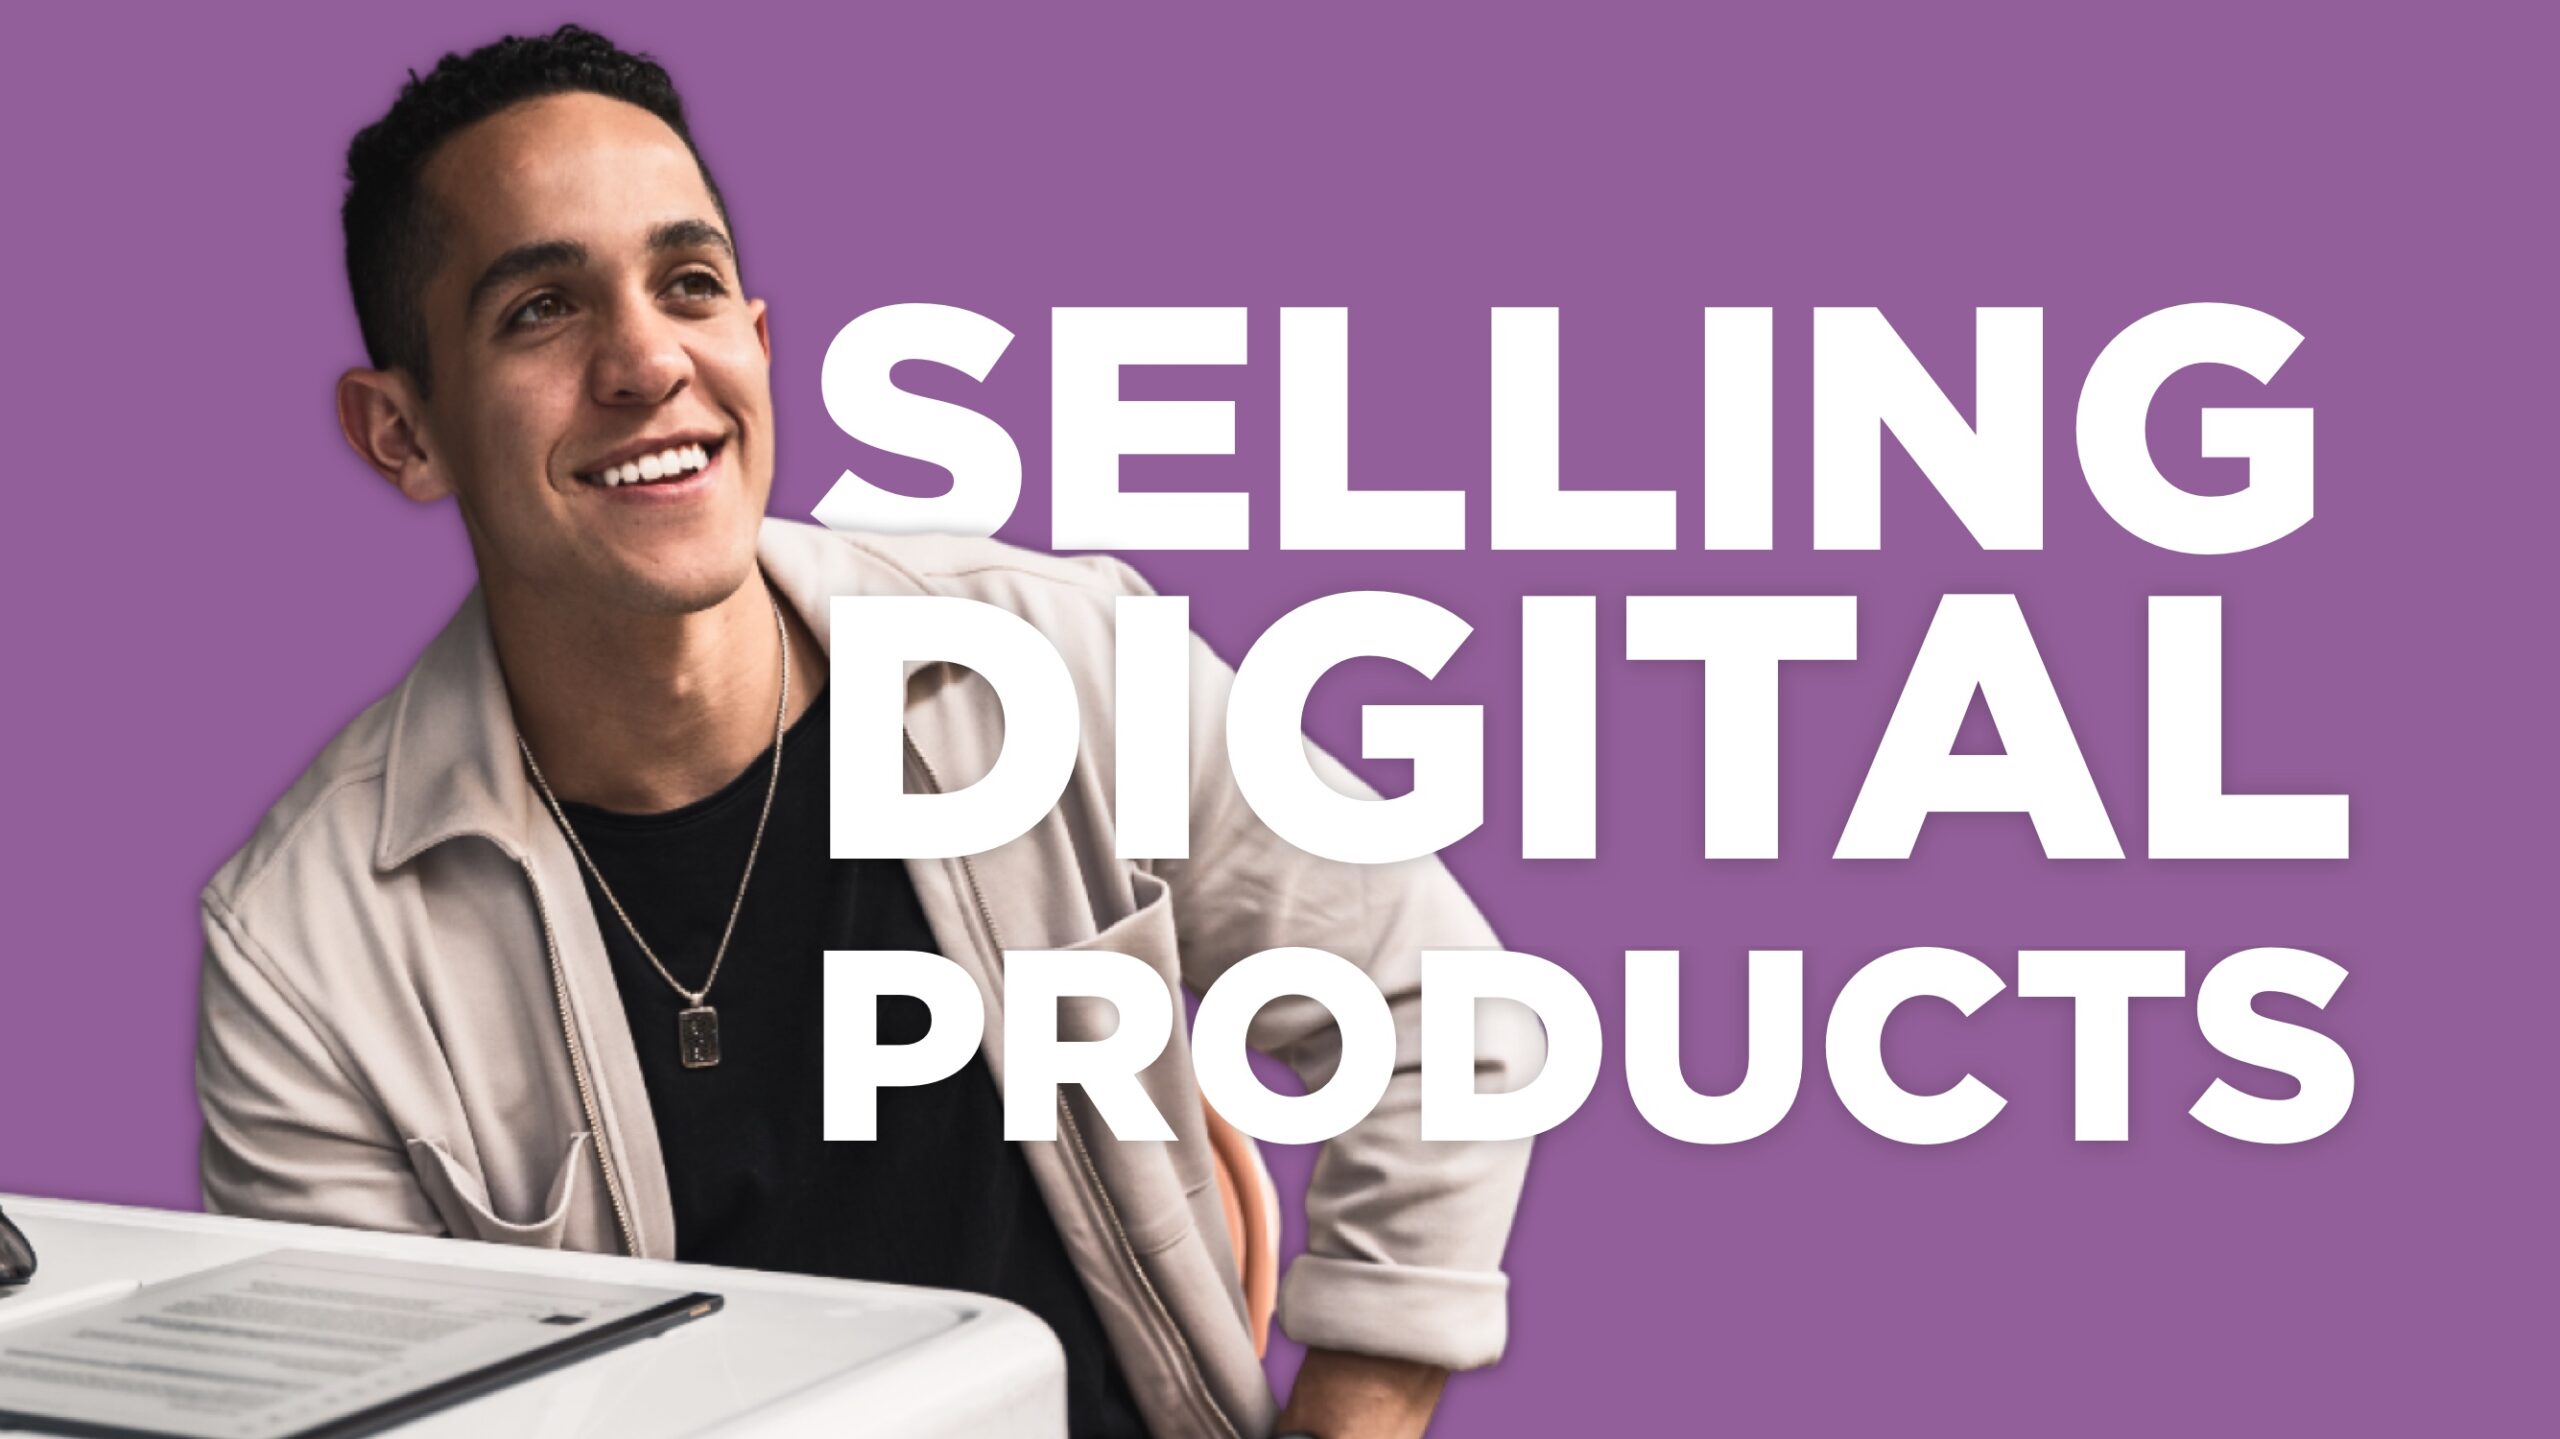 183 – Maximizing Profits: Insights into Creating and Selling Digital Products with Abraham Casallas